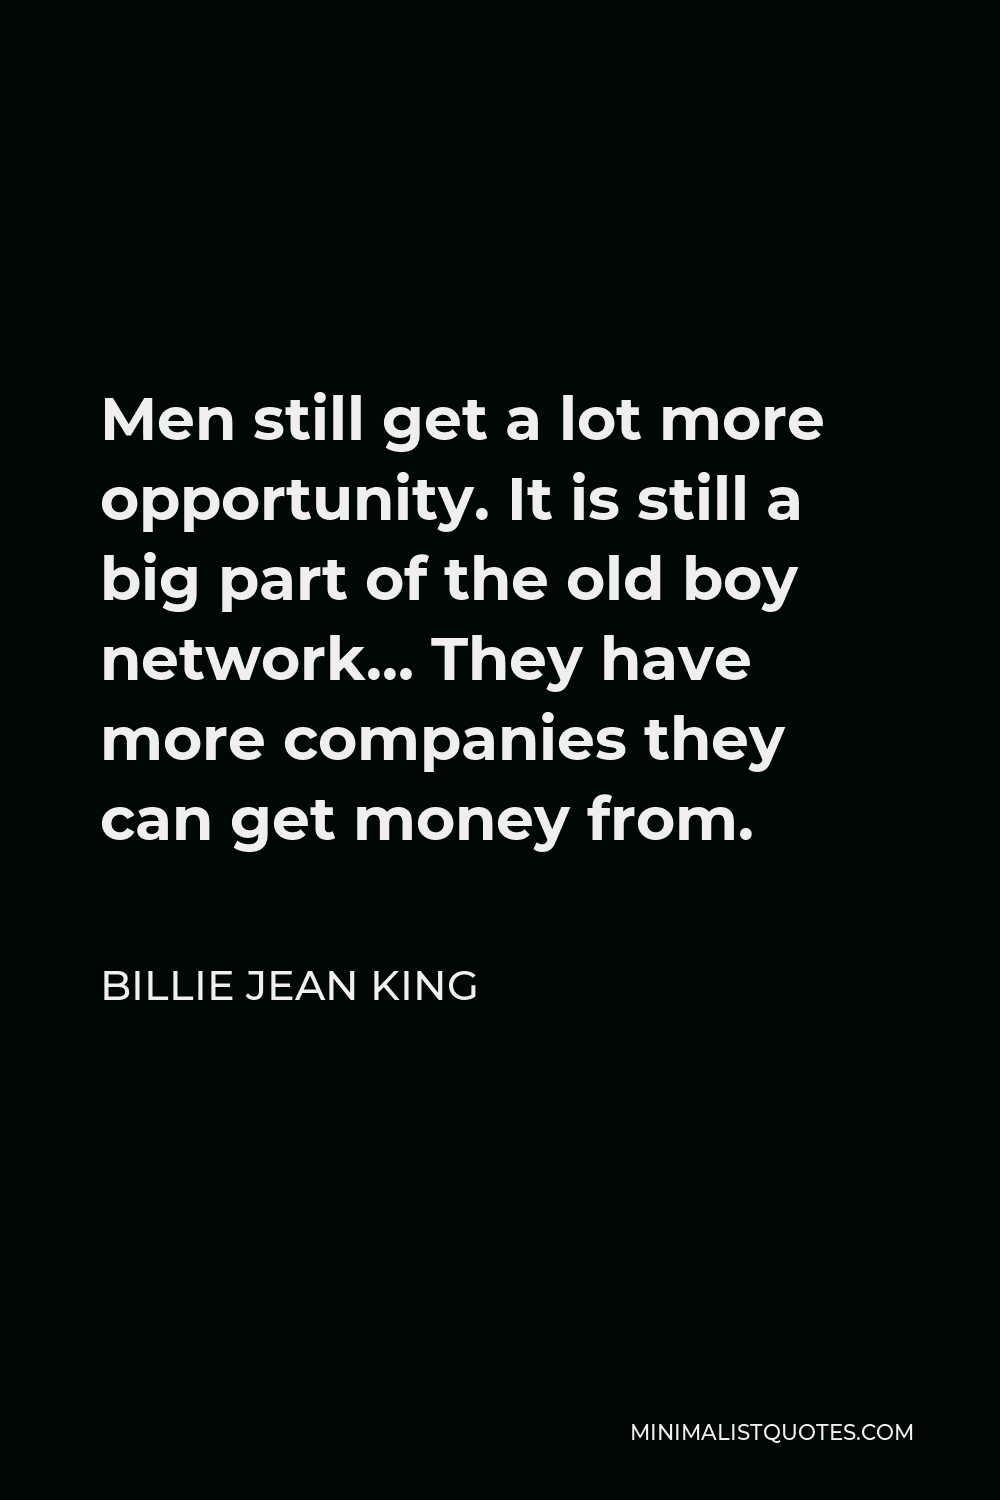 Billie Jean King Quote - Men still get a lot more opportunity. It is still a big part of the old boy network… They have more companies they can get money from.